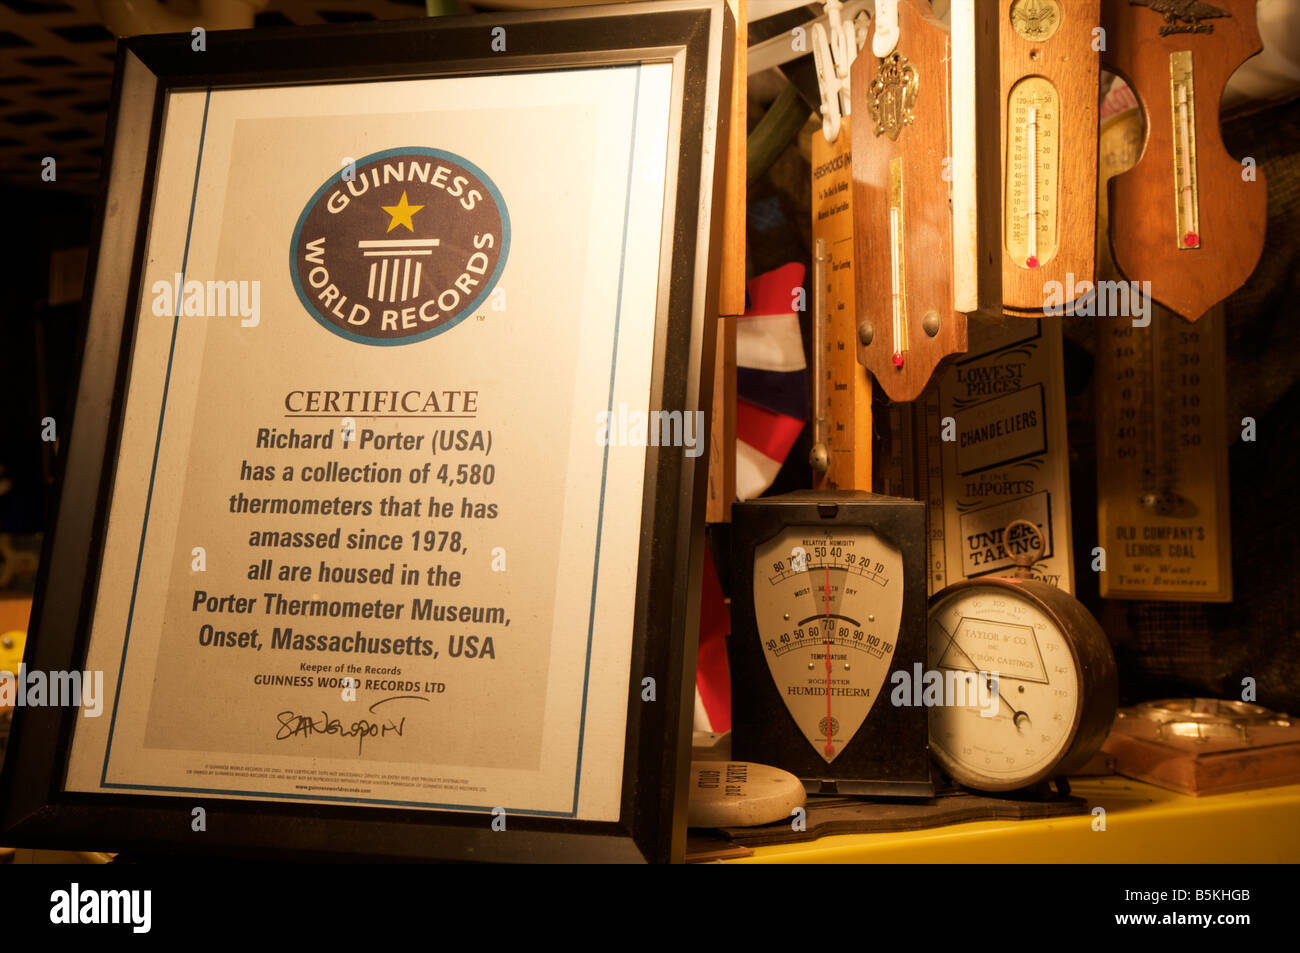 Guinness World record certificate of Richard Porter's thermometer collection. Stock Photo